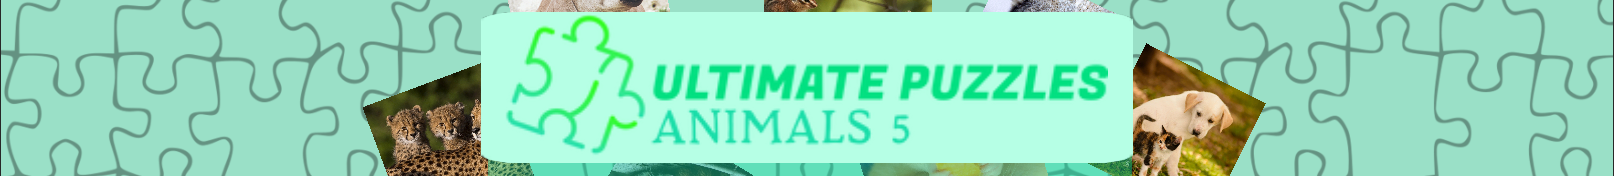 Ultimate Puzzles Animals 5